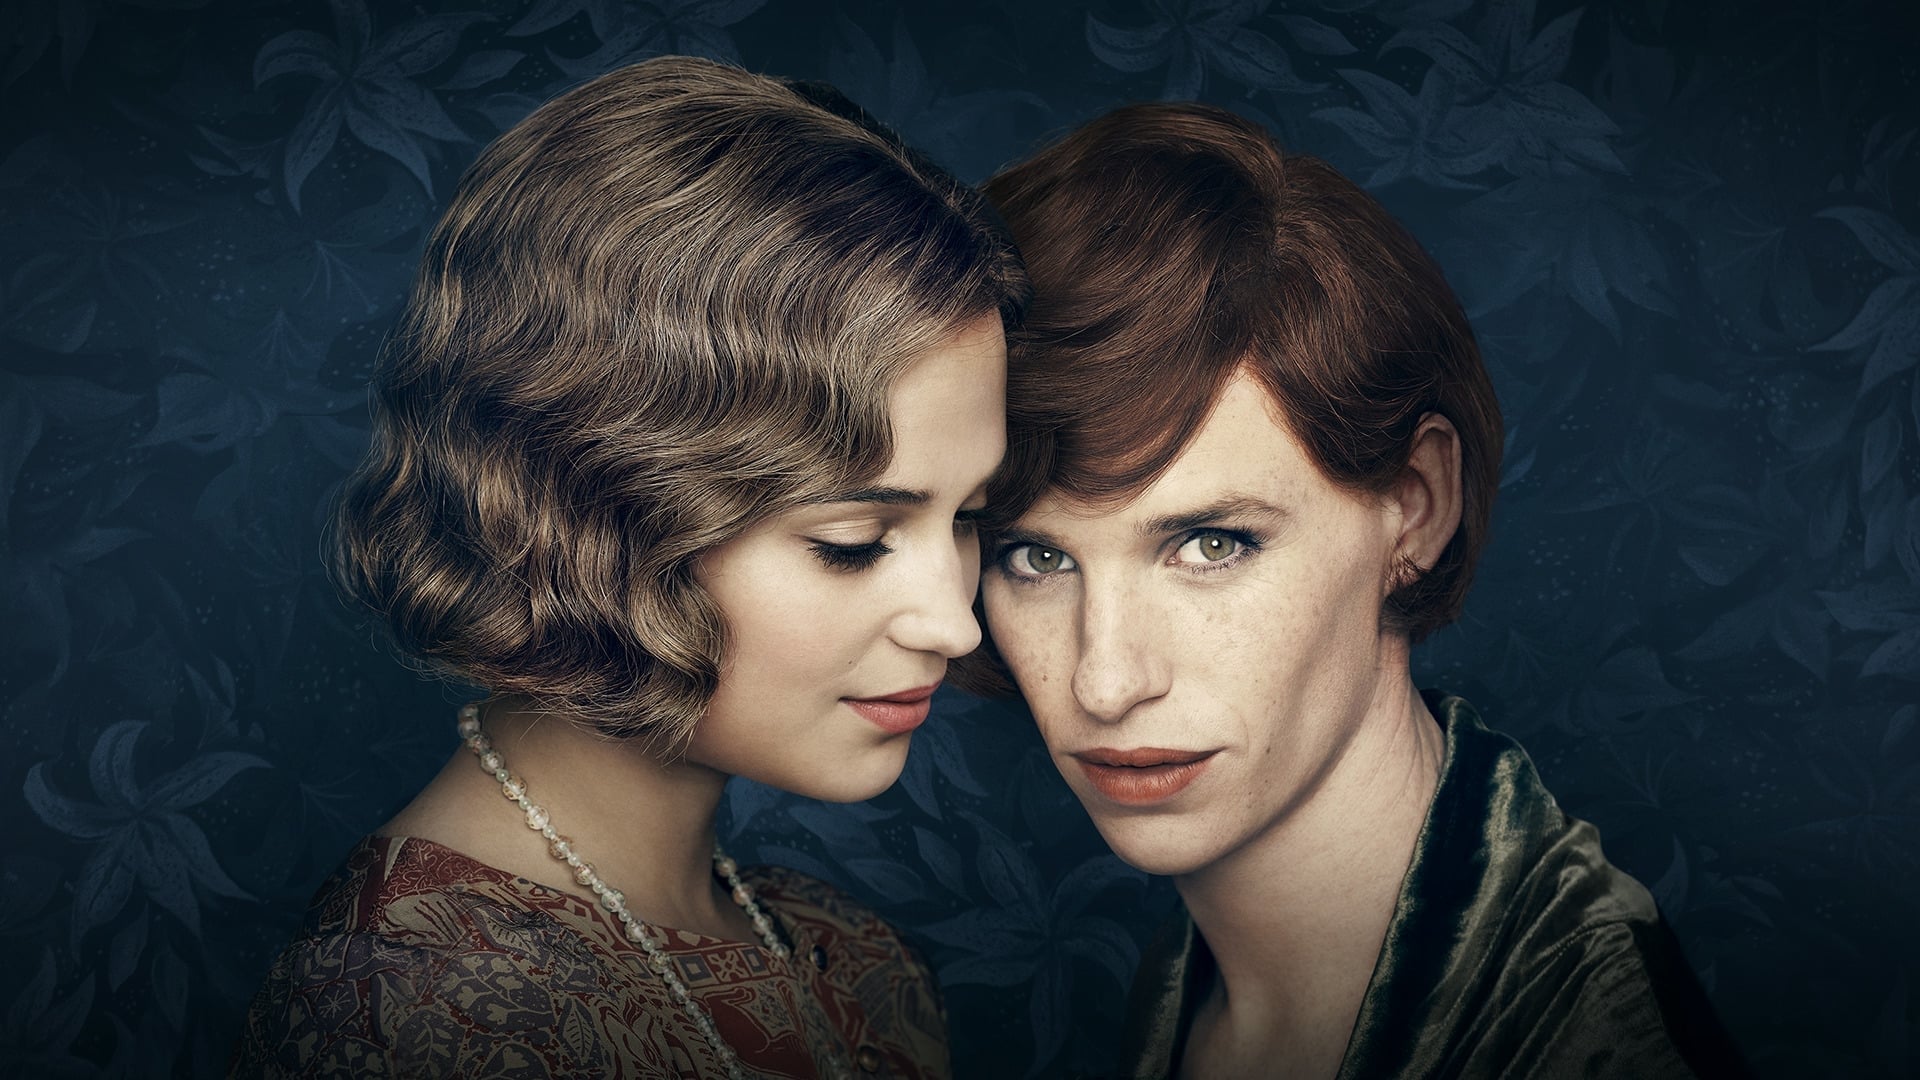 Watch The Danish Girl (2015) Full Movie Online Free in HD Quality - VIDEOST...